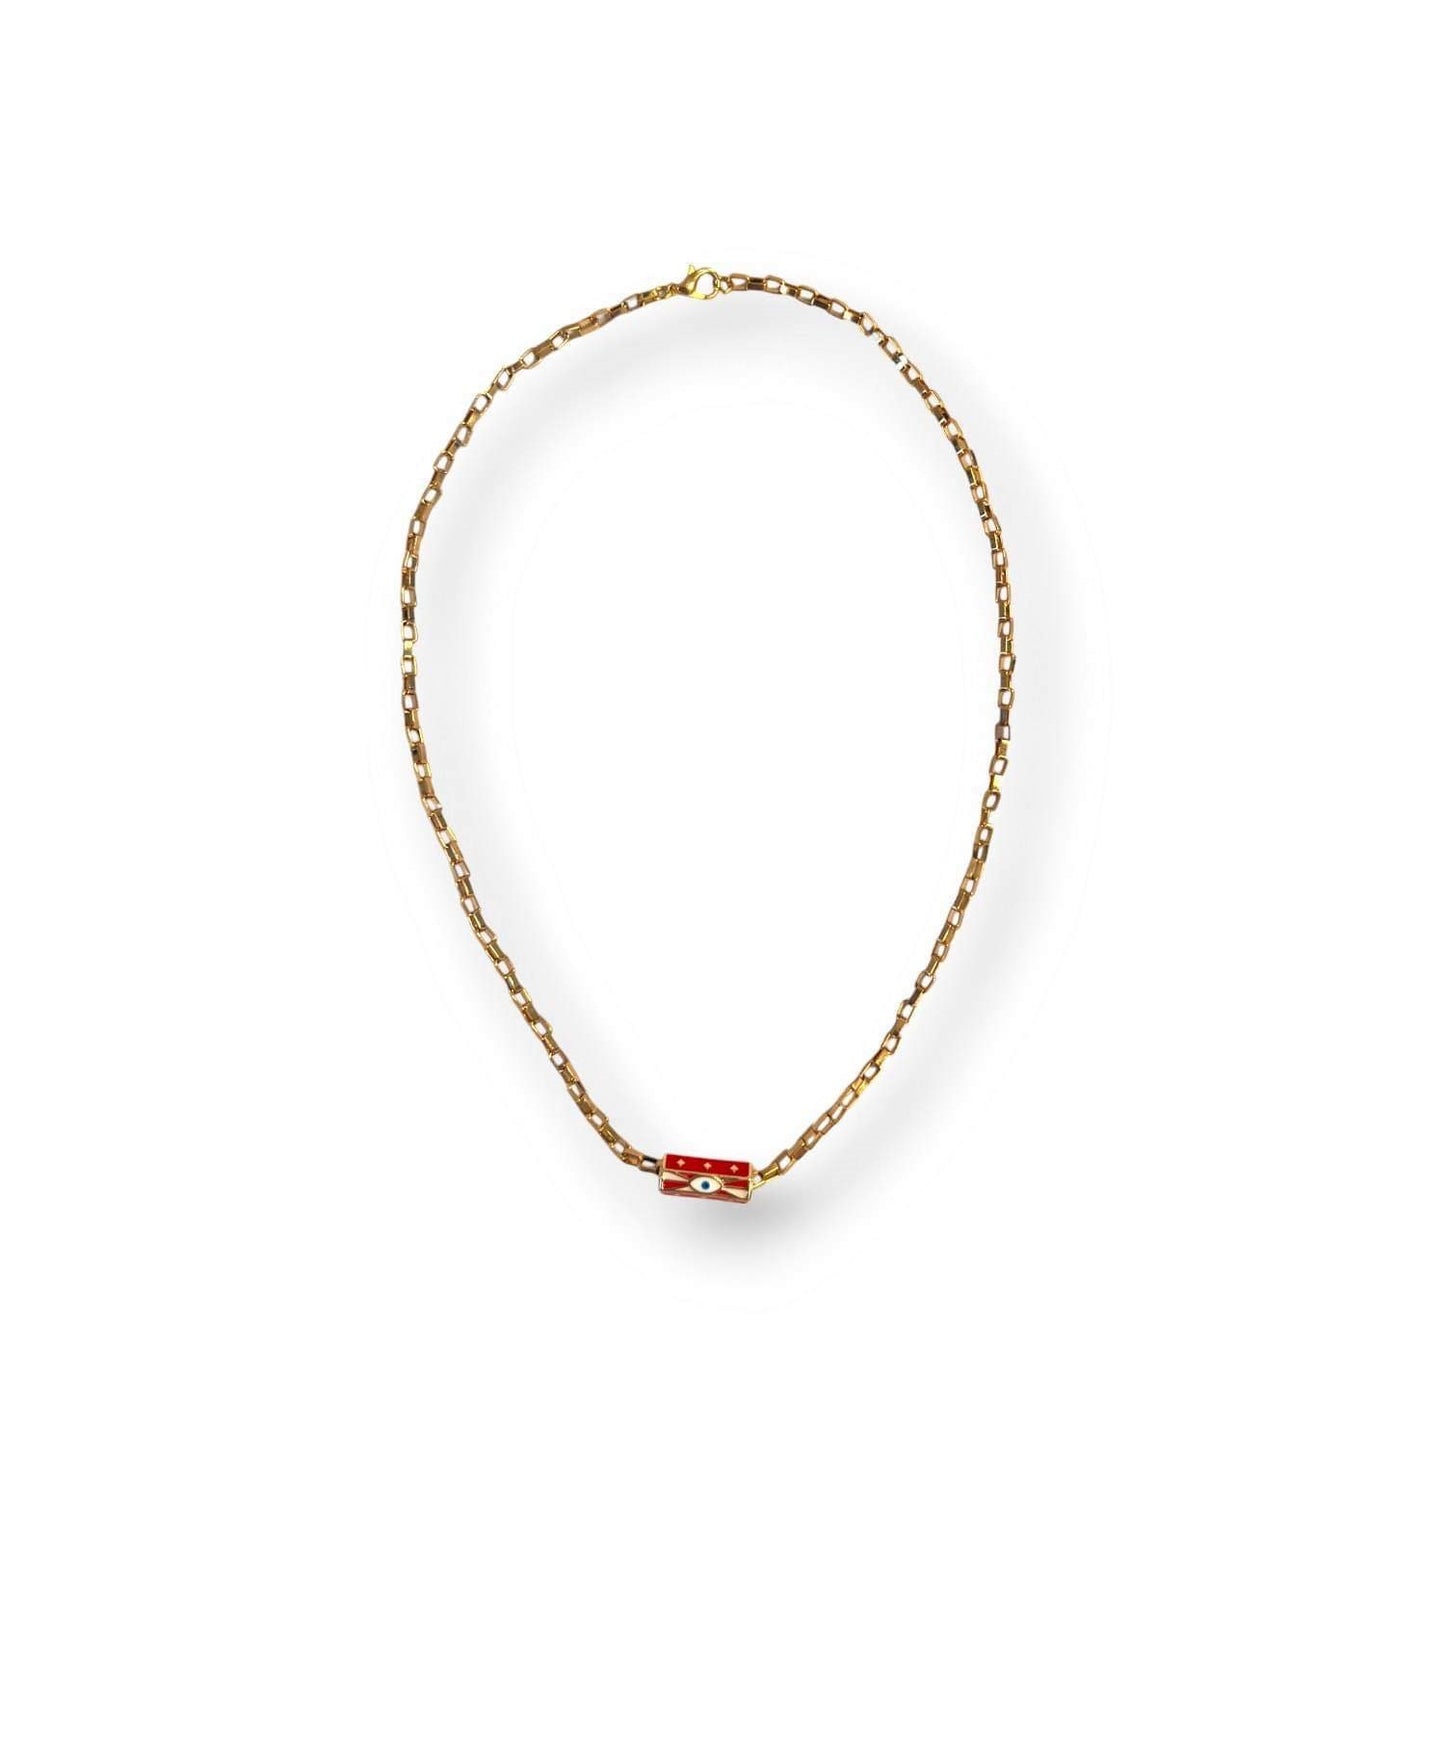 Simple Rounded Necklace with painted Red eye charm